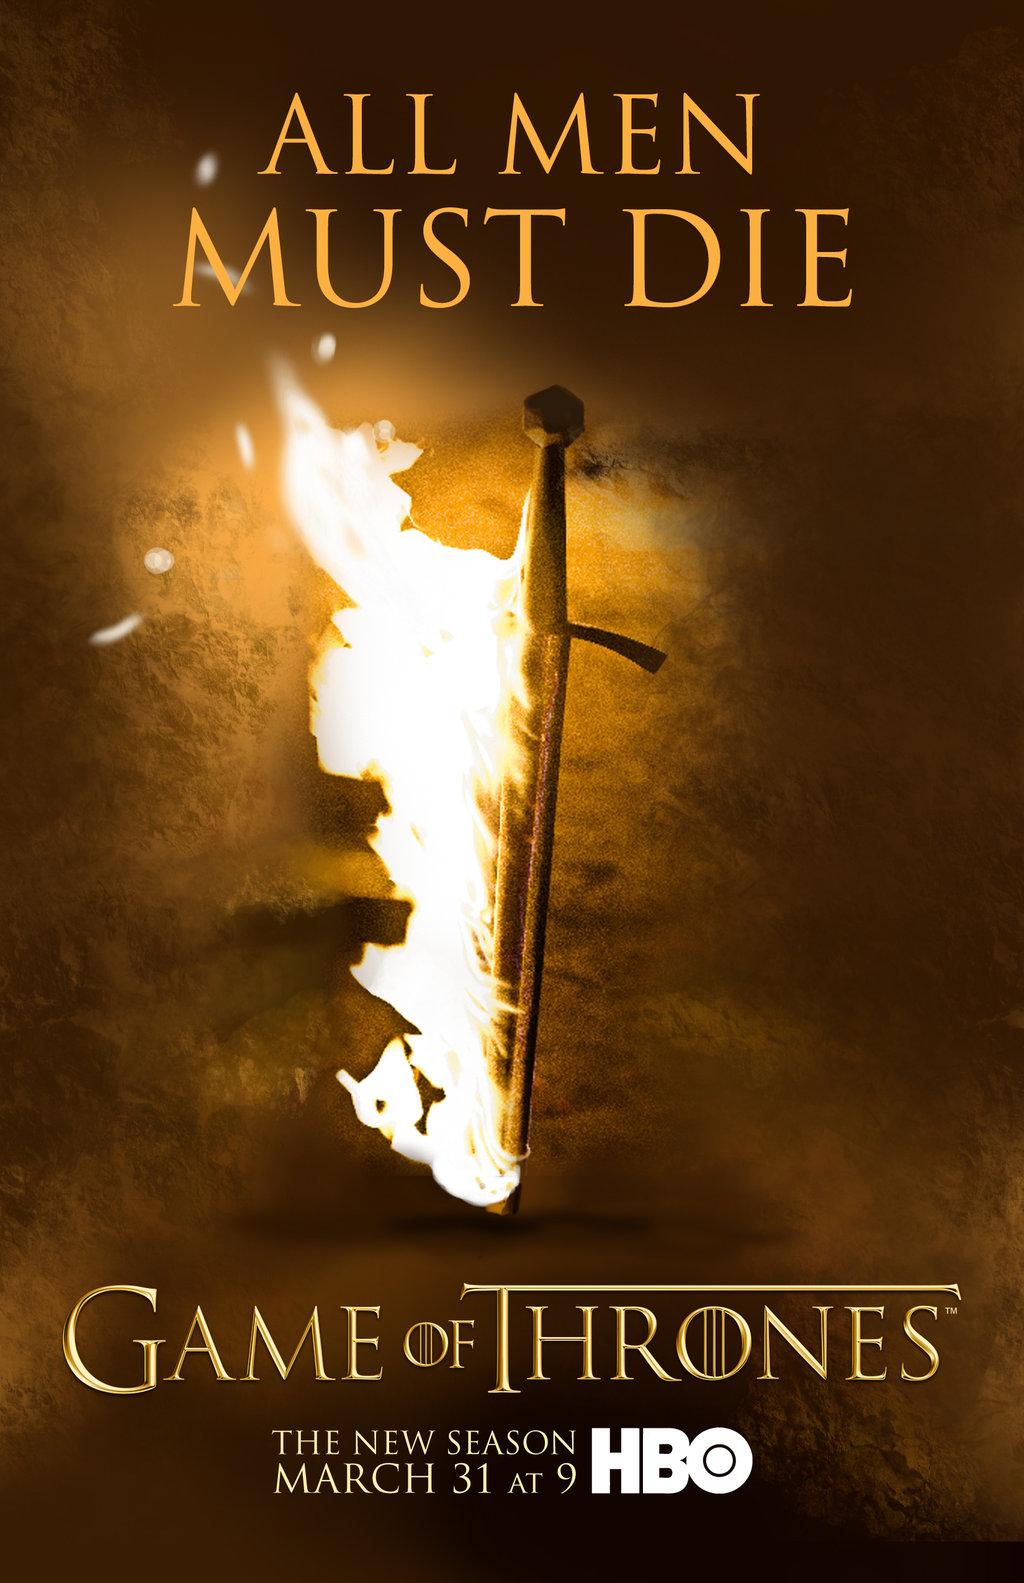 game_of_thrones_season_3_flaming_sword_poster_by_rewind_me-d5vyhqz